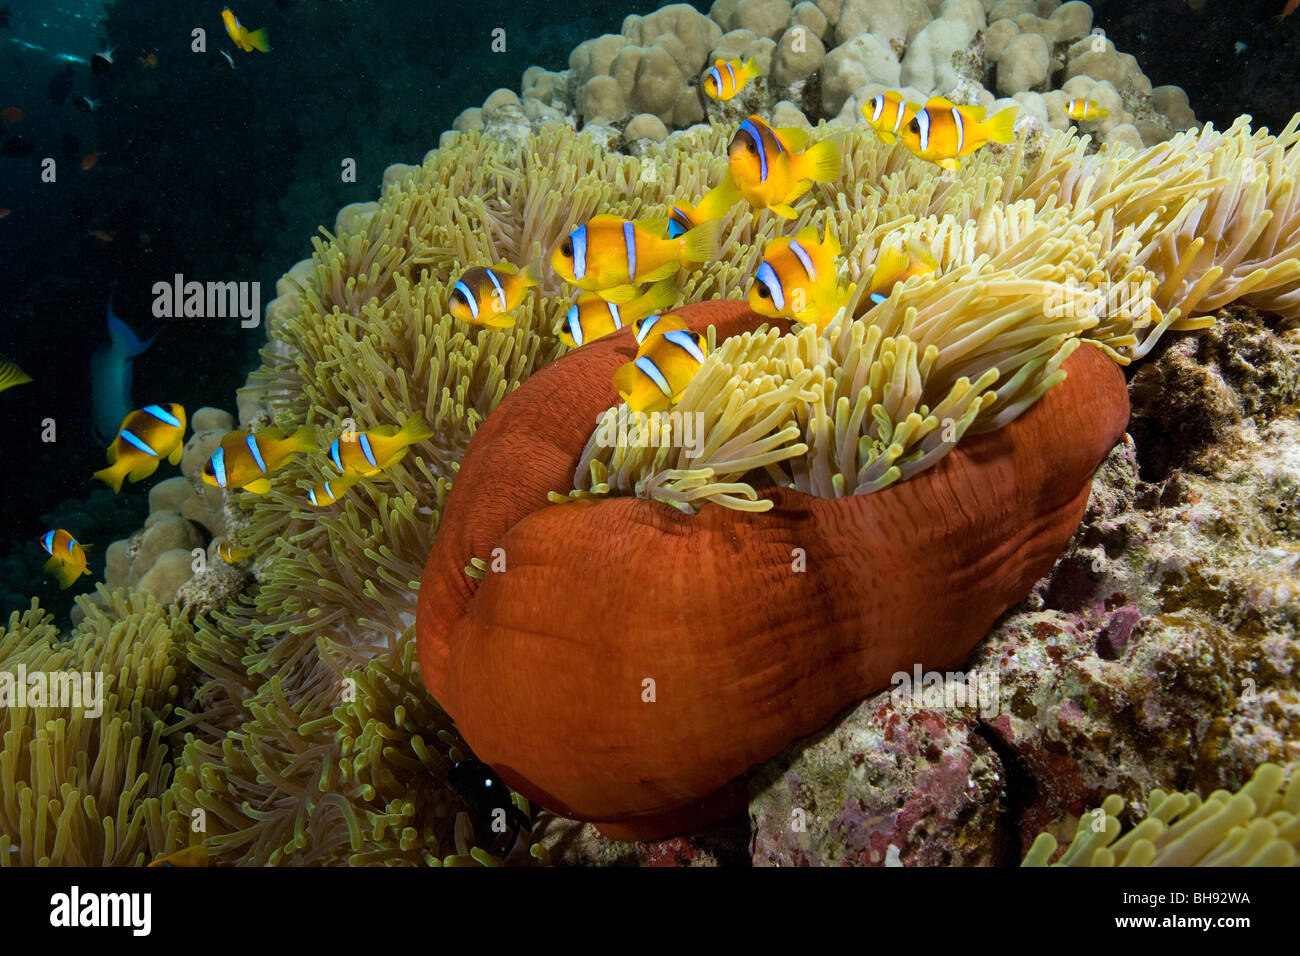 Red sea Anemonefish in Magnificent Anemone, Amphiprion bicinctus, Heteractis magnifica, Red Sea, Egypt Stock Photo